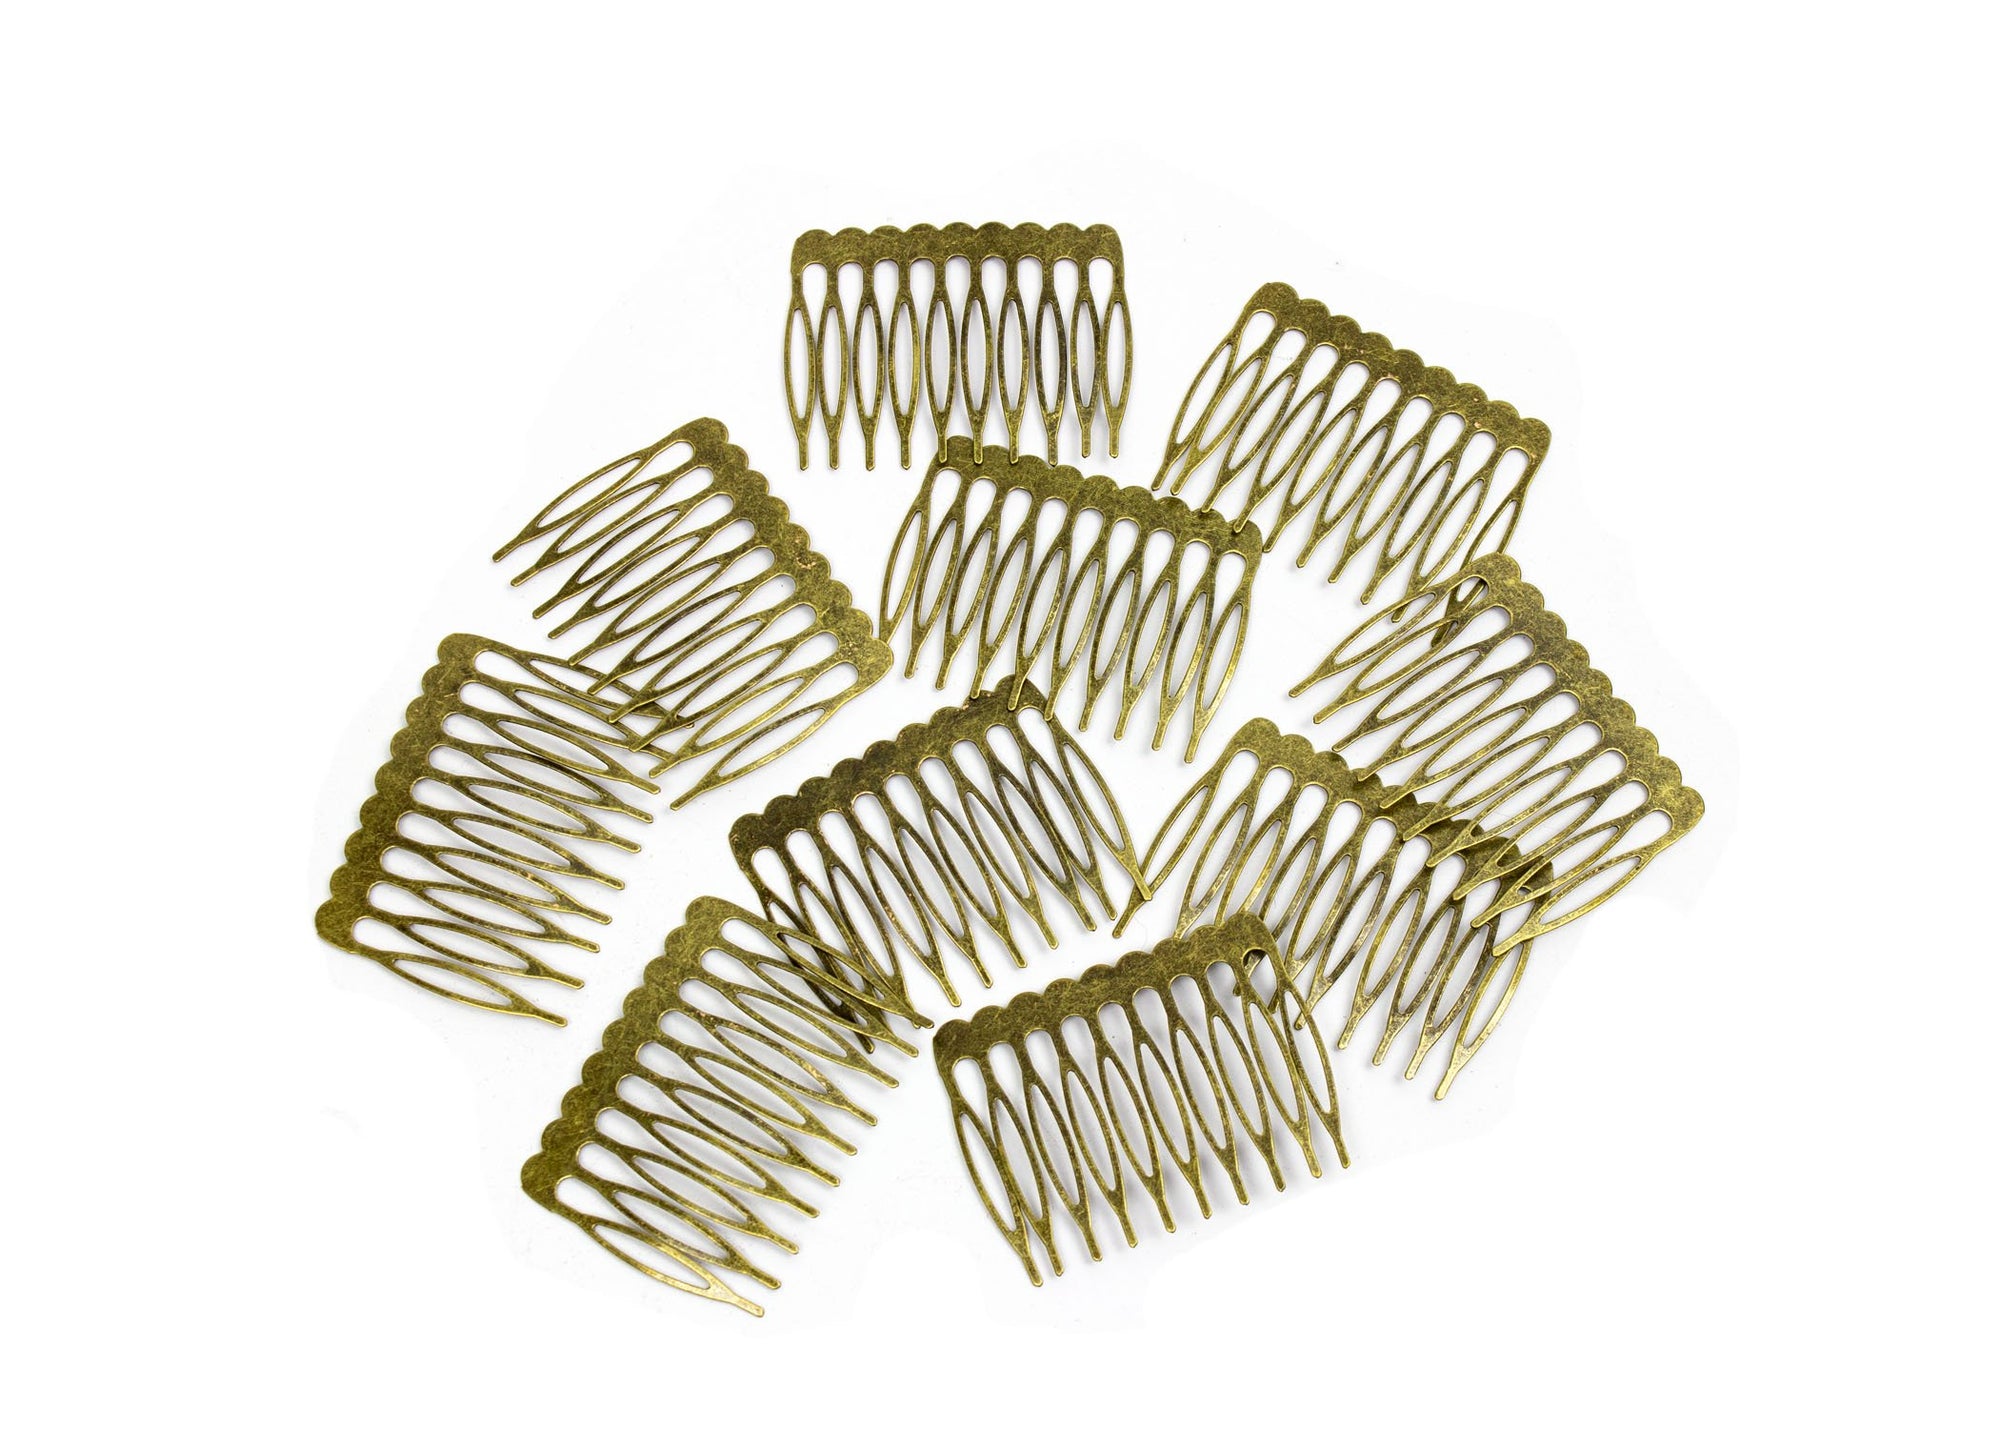 Metal Millinery or Veil Hair Comb 2 Wide - 10 Pieces - Humboldt  Haberdashery